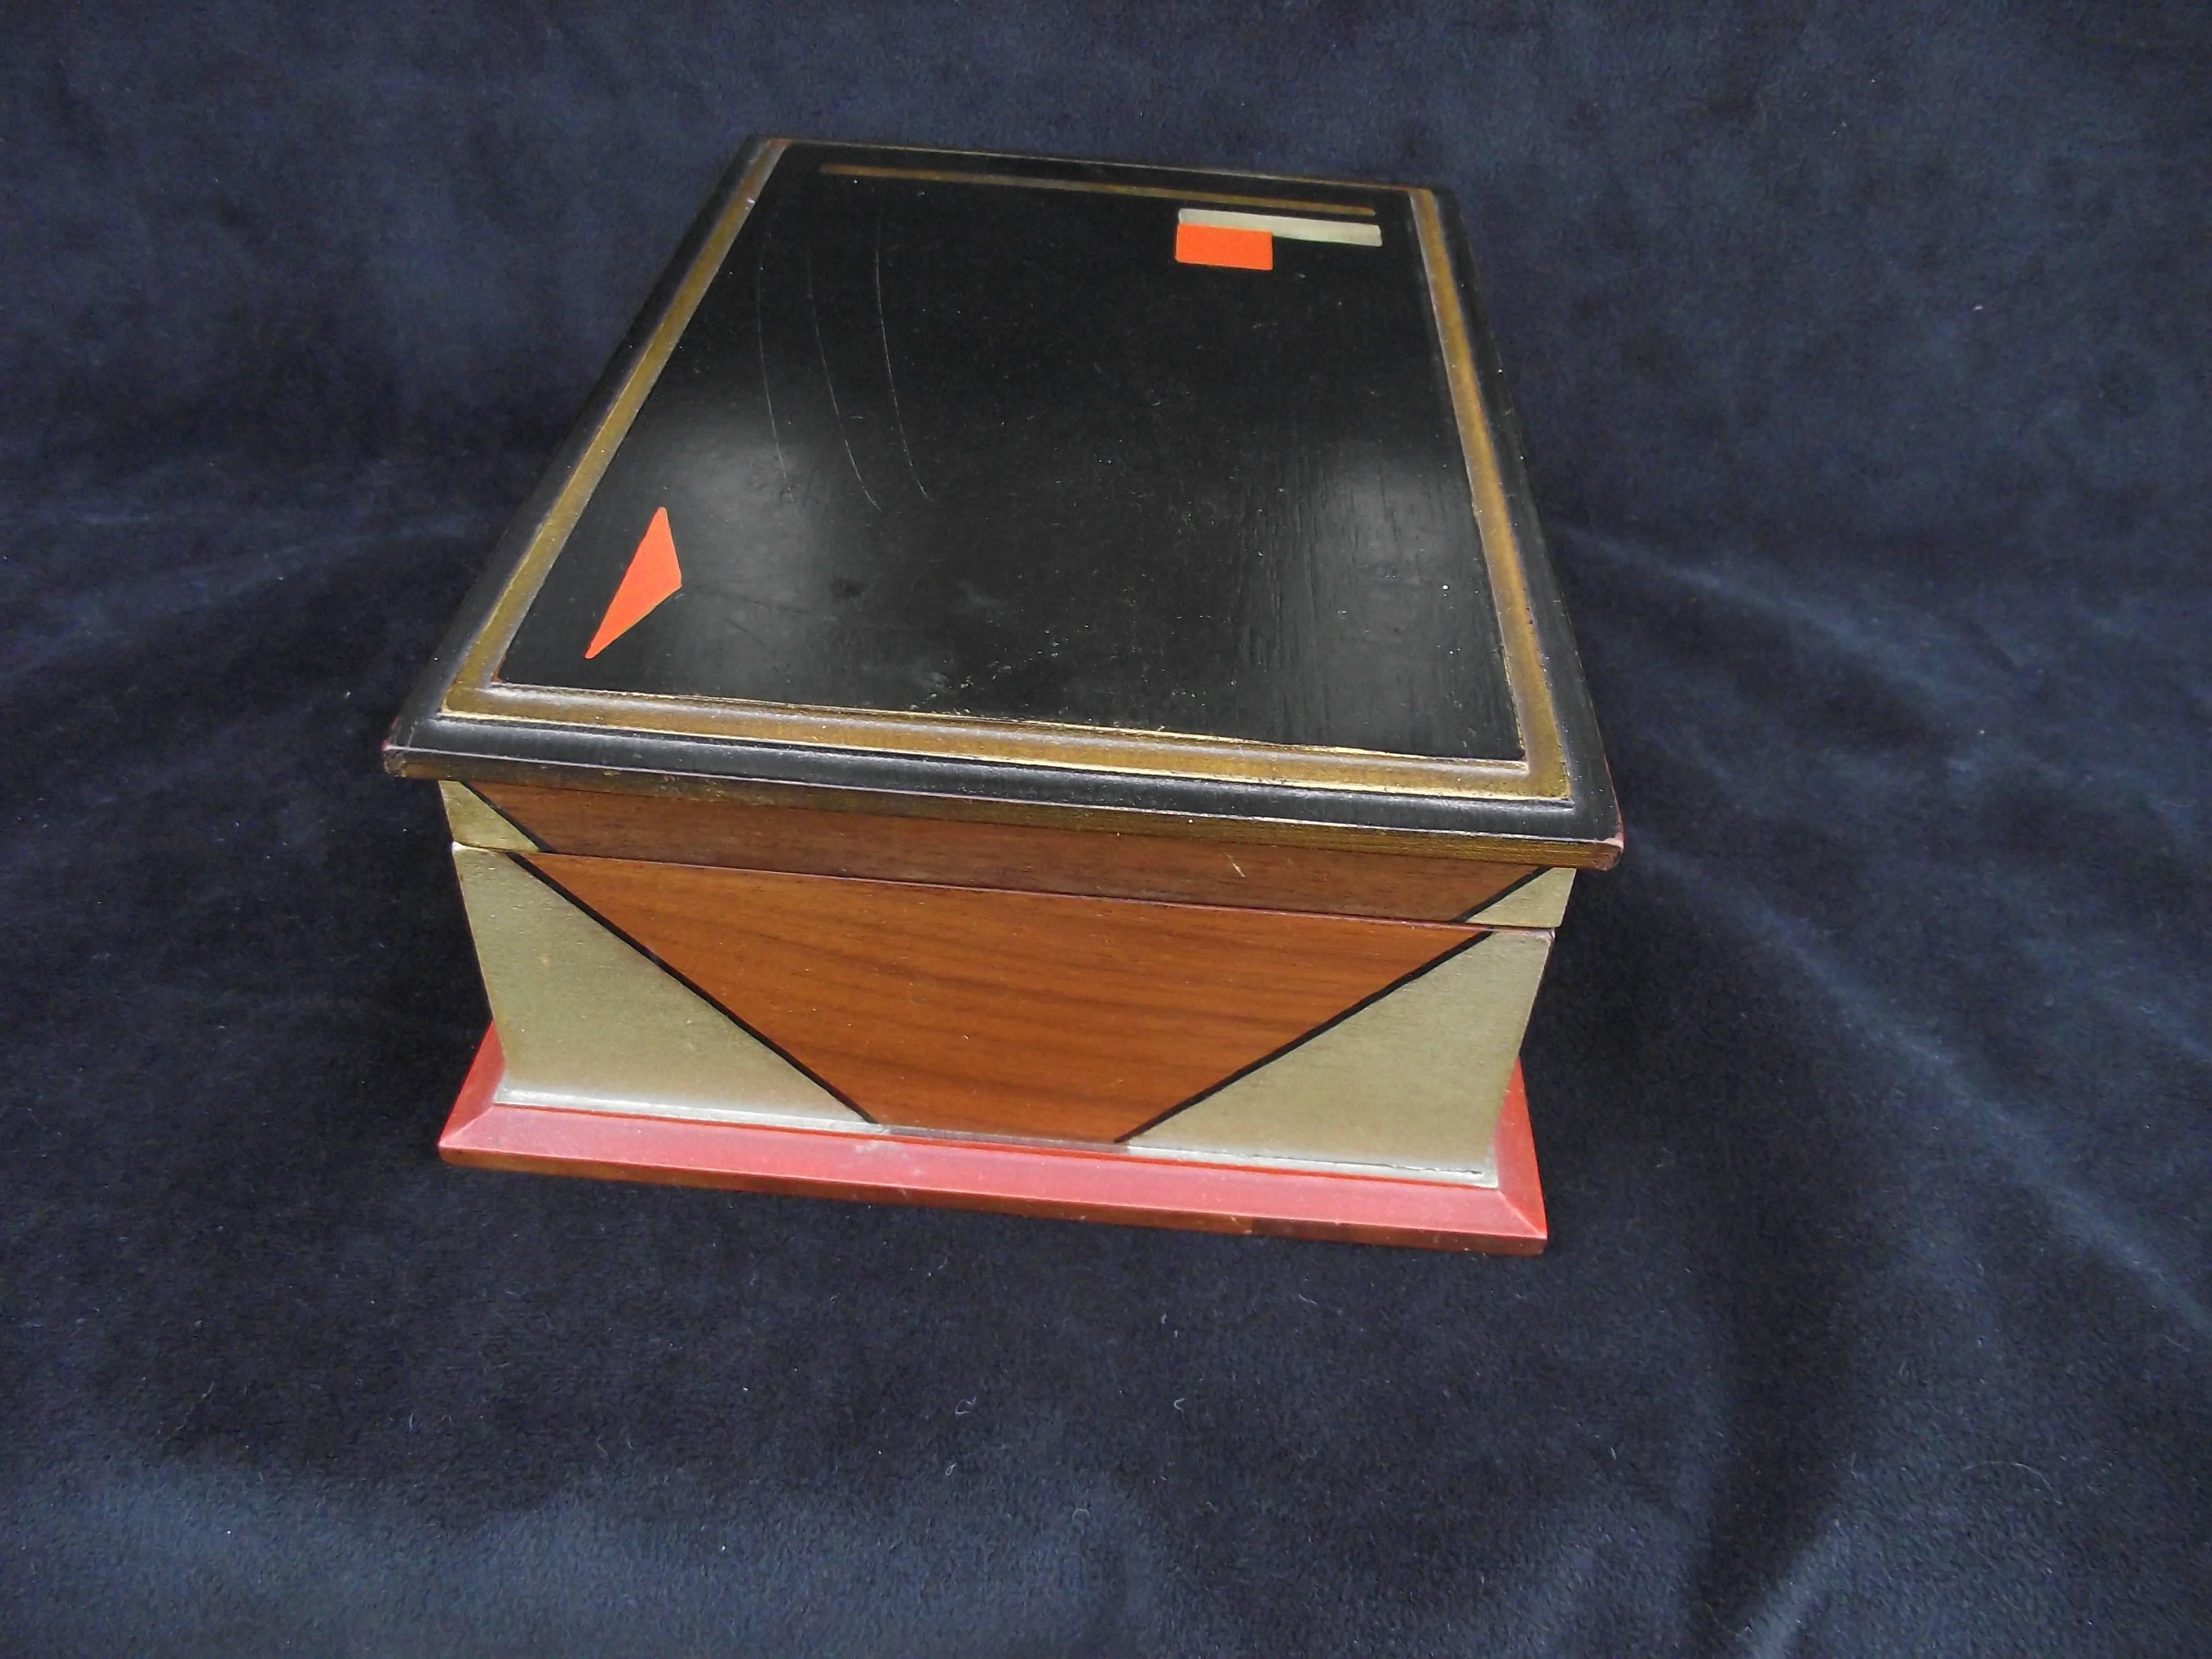 This rare hand-painted Art Deco box features two shades of gold metallic trim. It has tow red accents on top and a more muted red trim around the bottom edge.